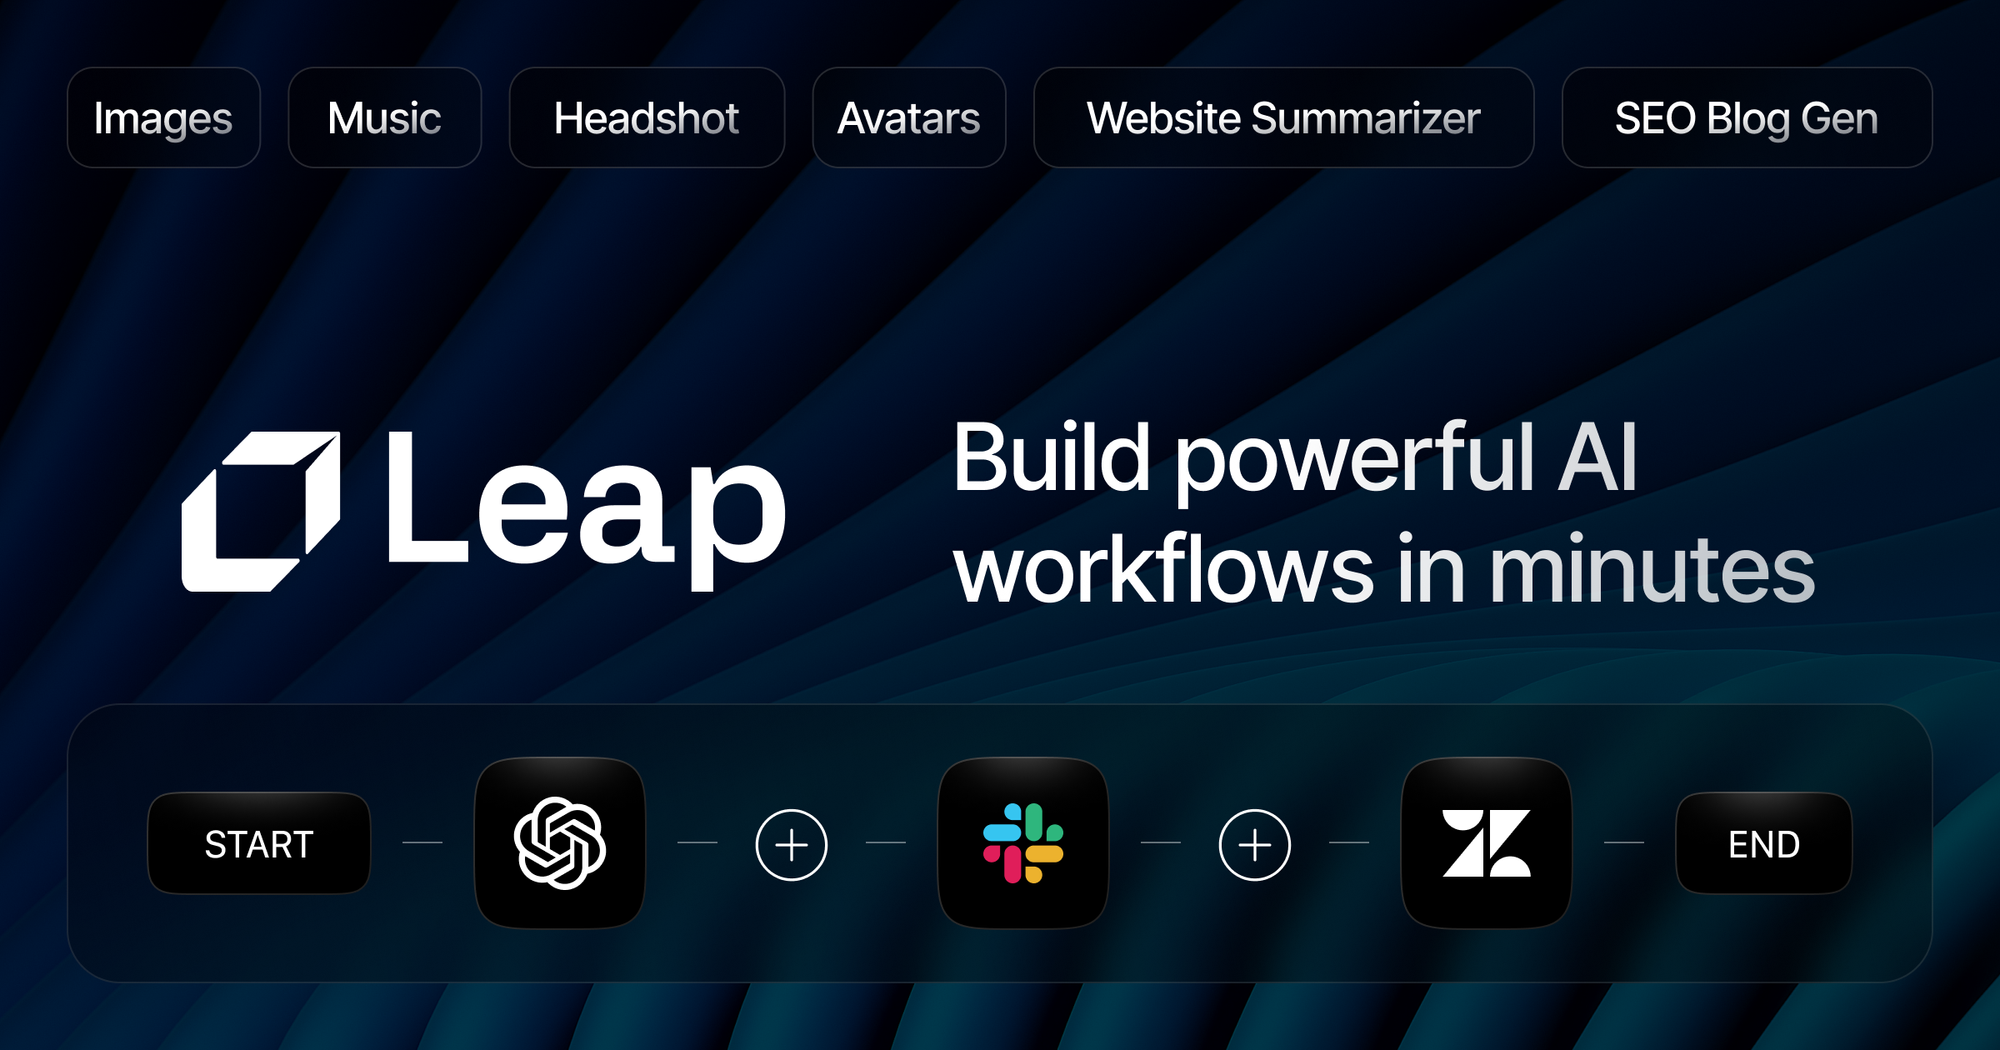 Use Leap's AI Content Creation Tools To Build Powerful AI Workflows for Your Business In Minutes